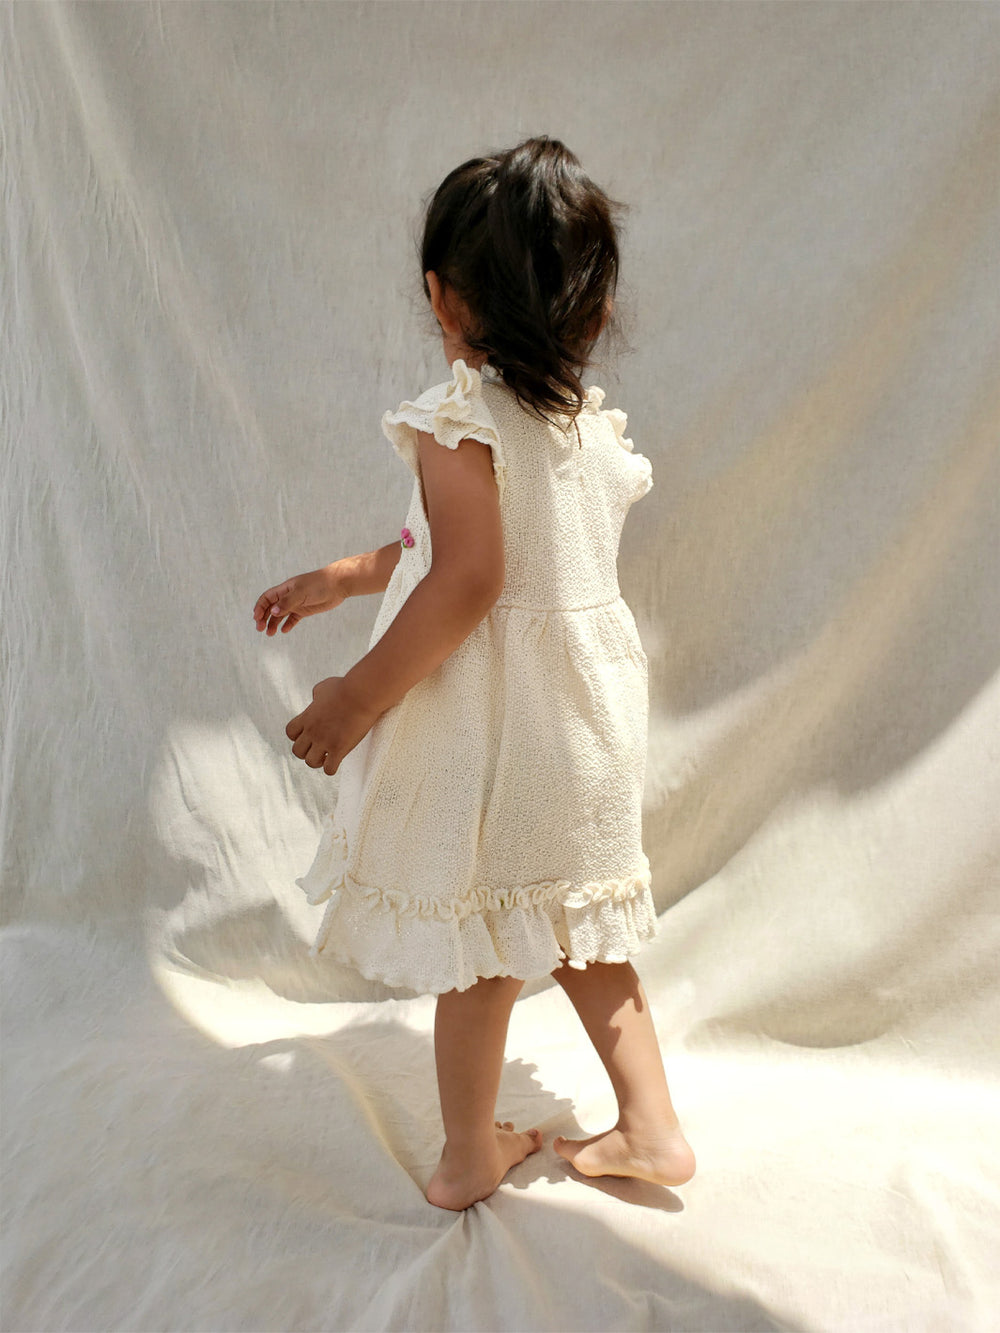 Liten Aventuris Collections. A dream fit for your little girl! Our Tanya Dress has an A-line fit and fun double-layer butterfly sleeves perfect for twirling and dancing. Made of knitted cotton fabric with hand embroidery inspired by nature. Embroidered by Peruvian artisans, this dress brings a touch of whimsy with its decorative fringe. Let your little one explore the world in style! Bomullsklänning för babis och flickor.